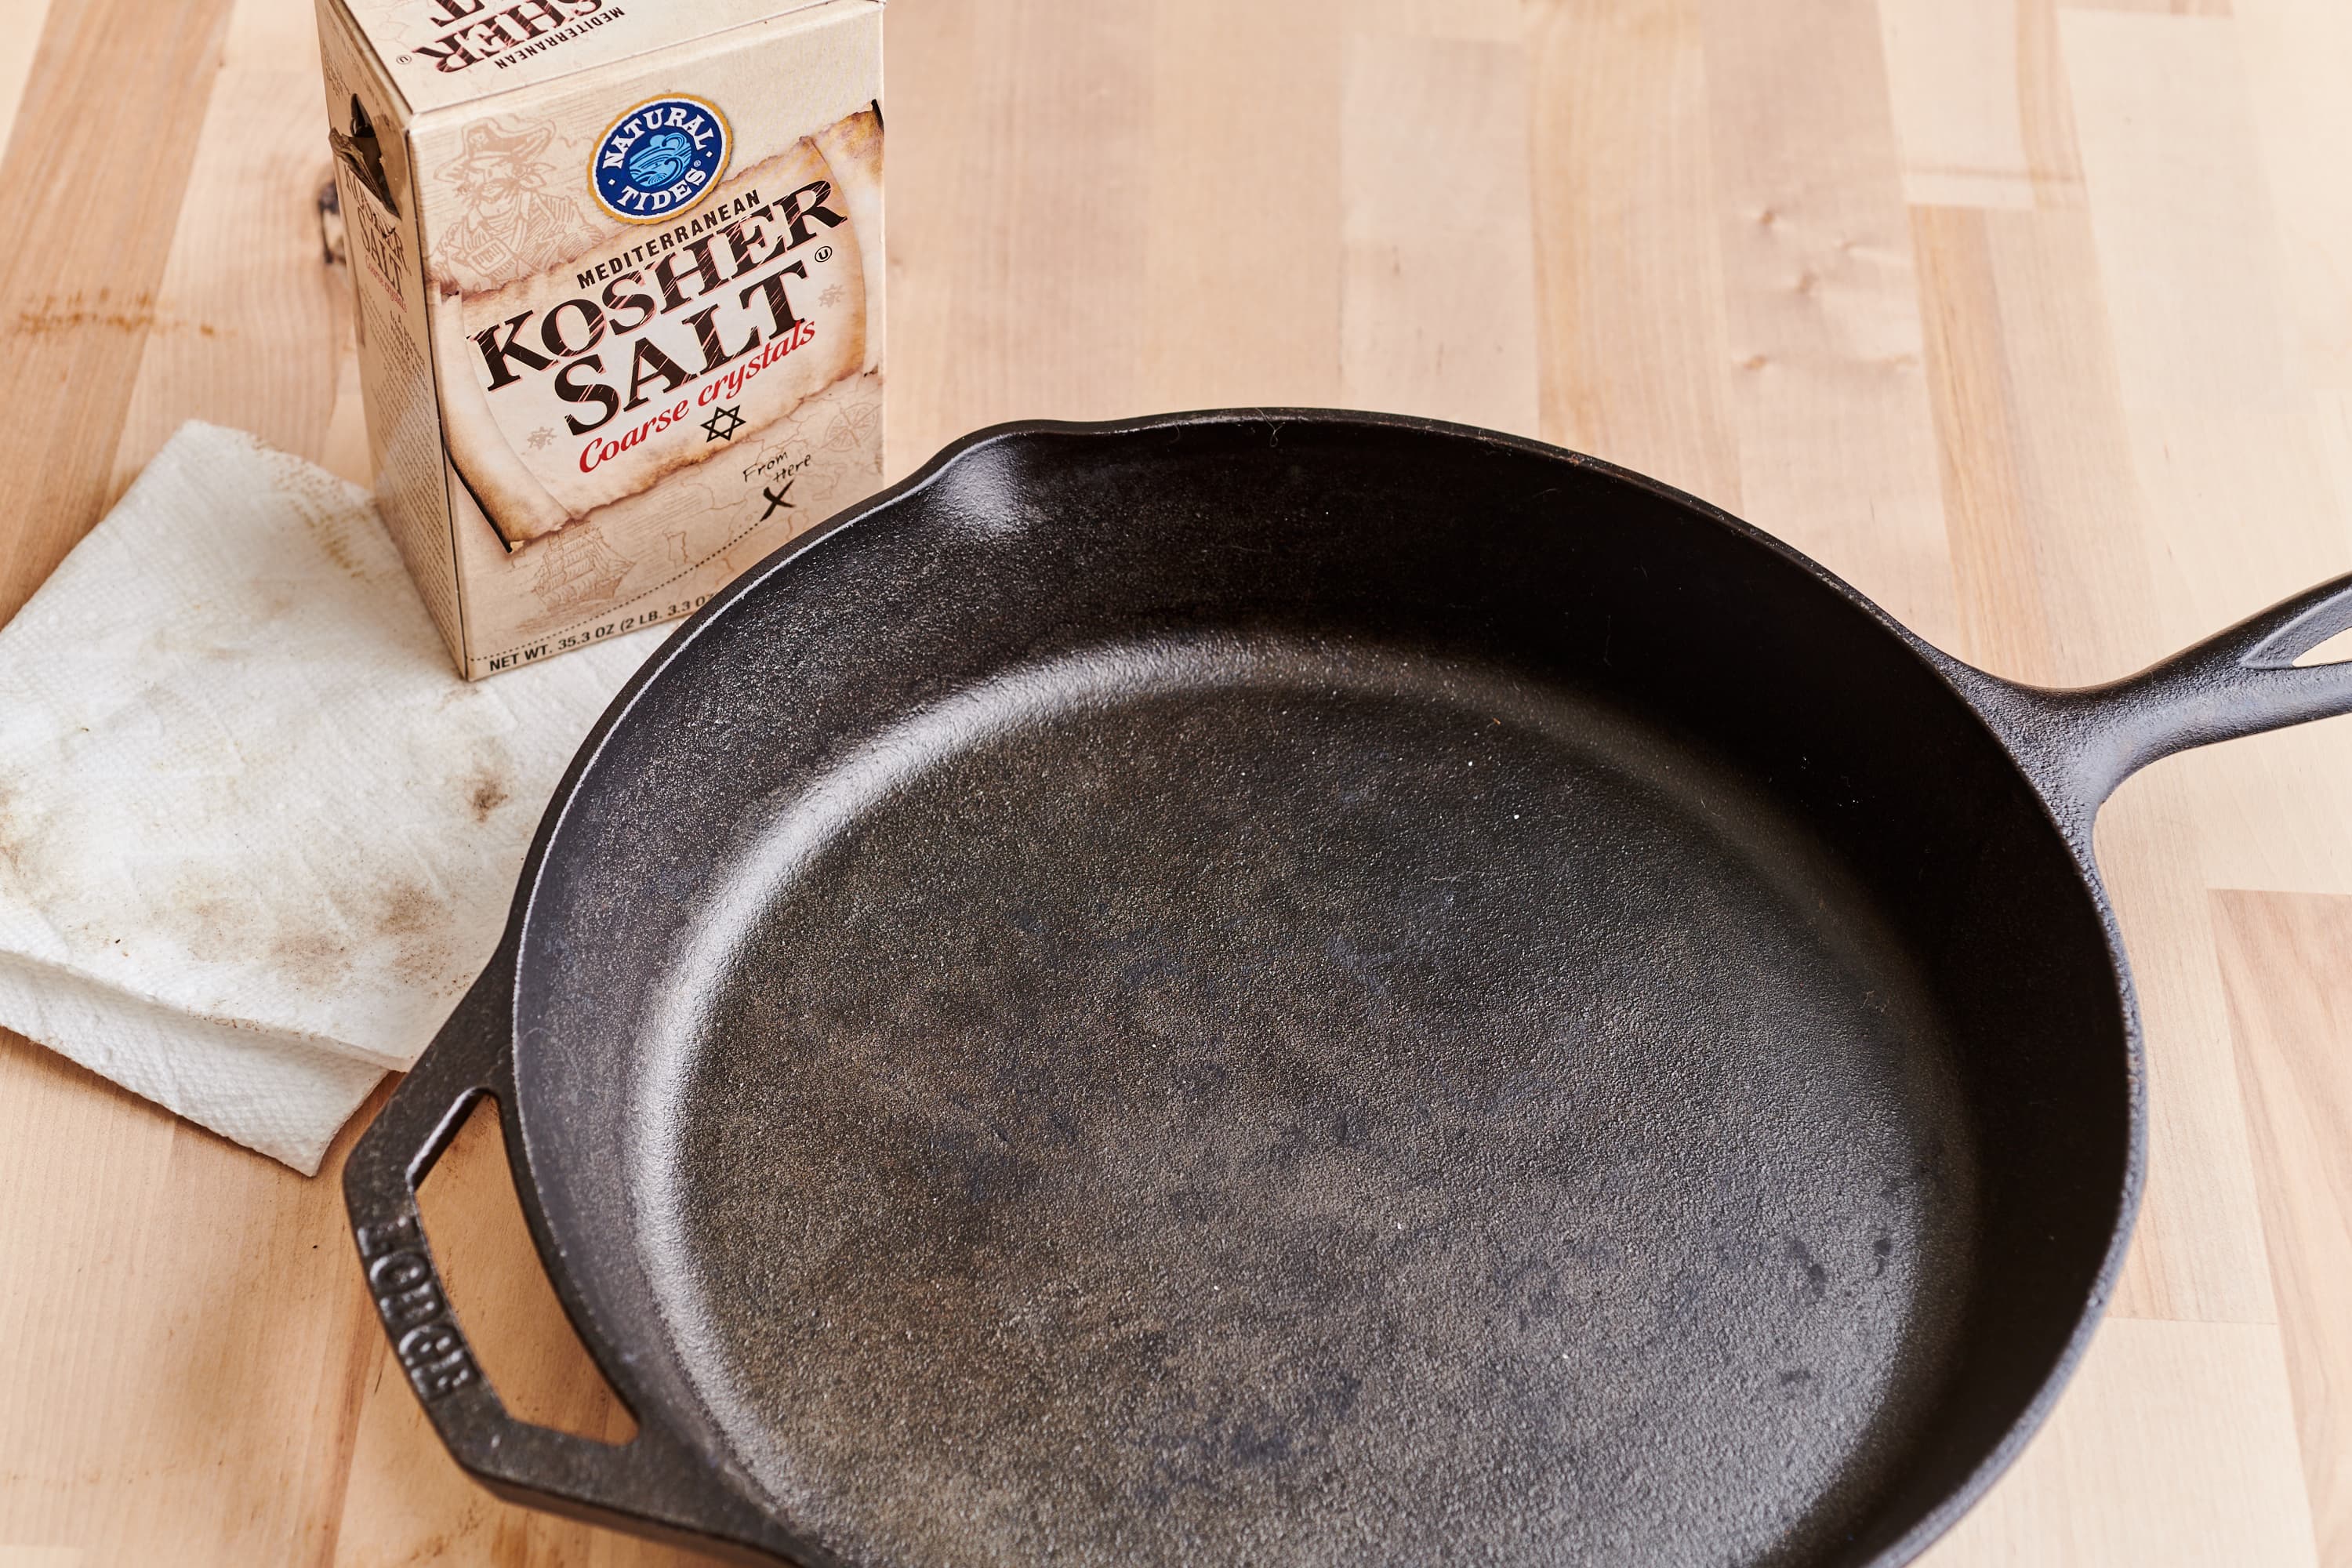 How Can I Tell When My Cast Iron Pan Is Clean?